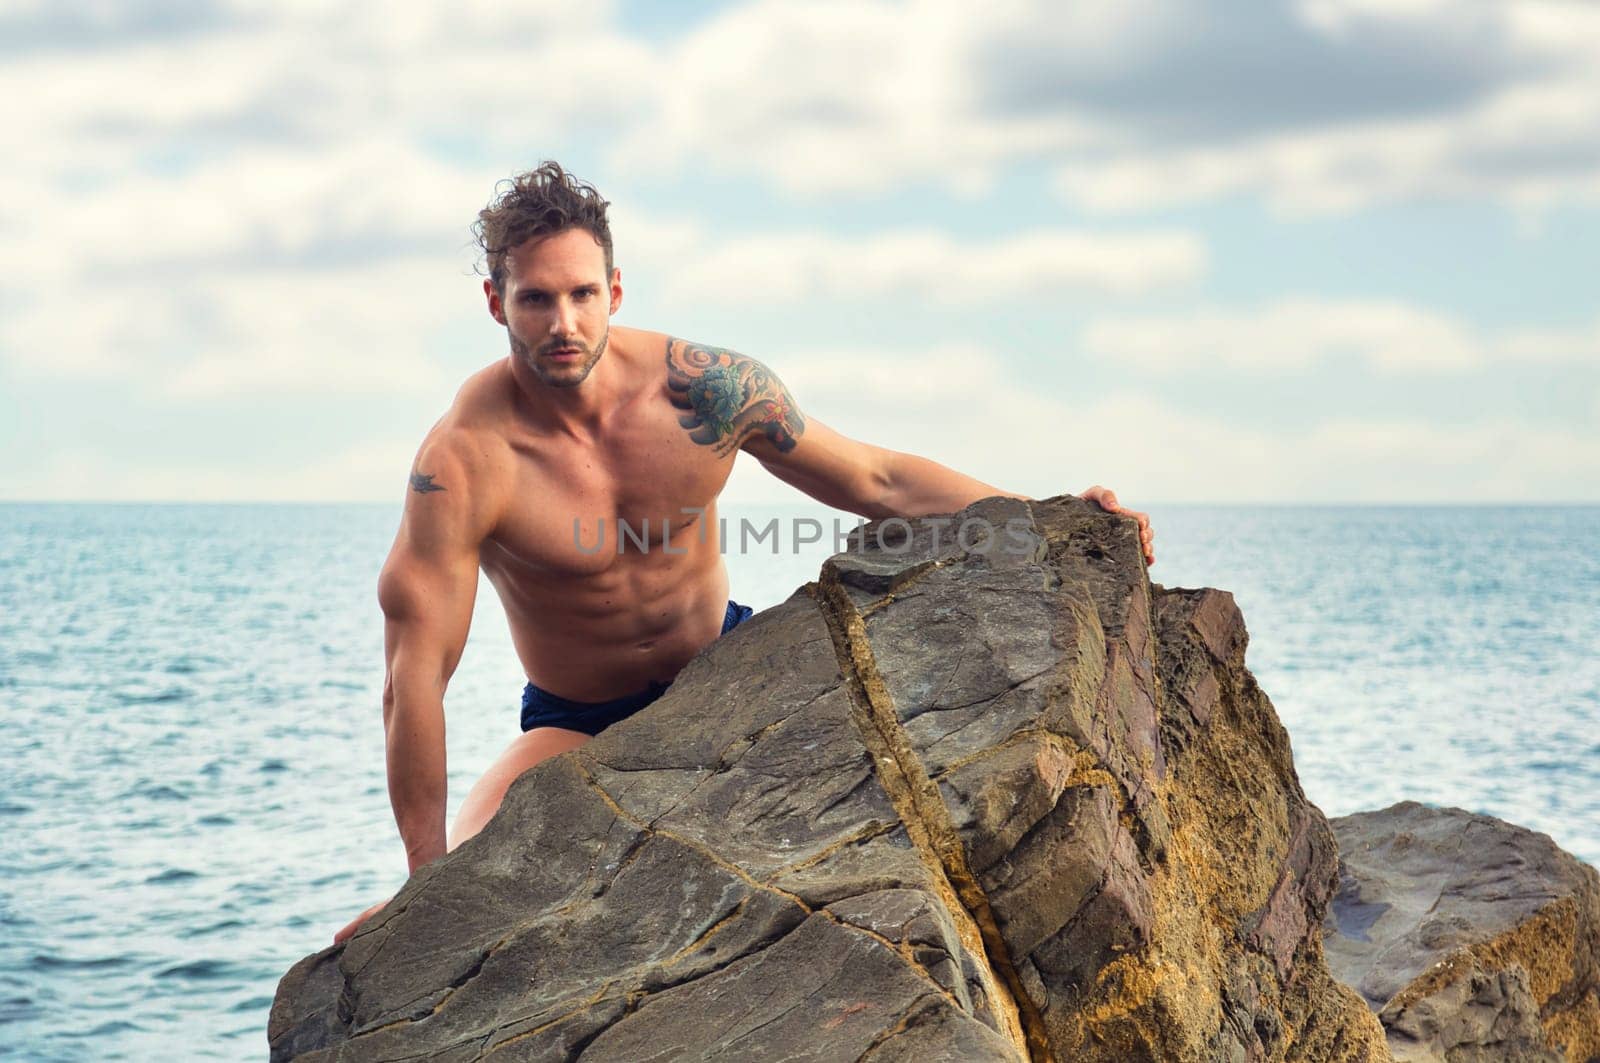 Attractive muscular shirtless athletic man standing on rock next to water by sea or ocean shore, looking at camera in a cloudy summer day